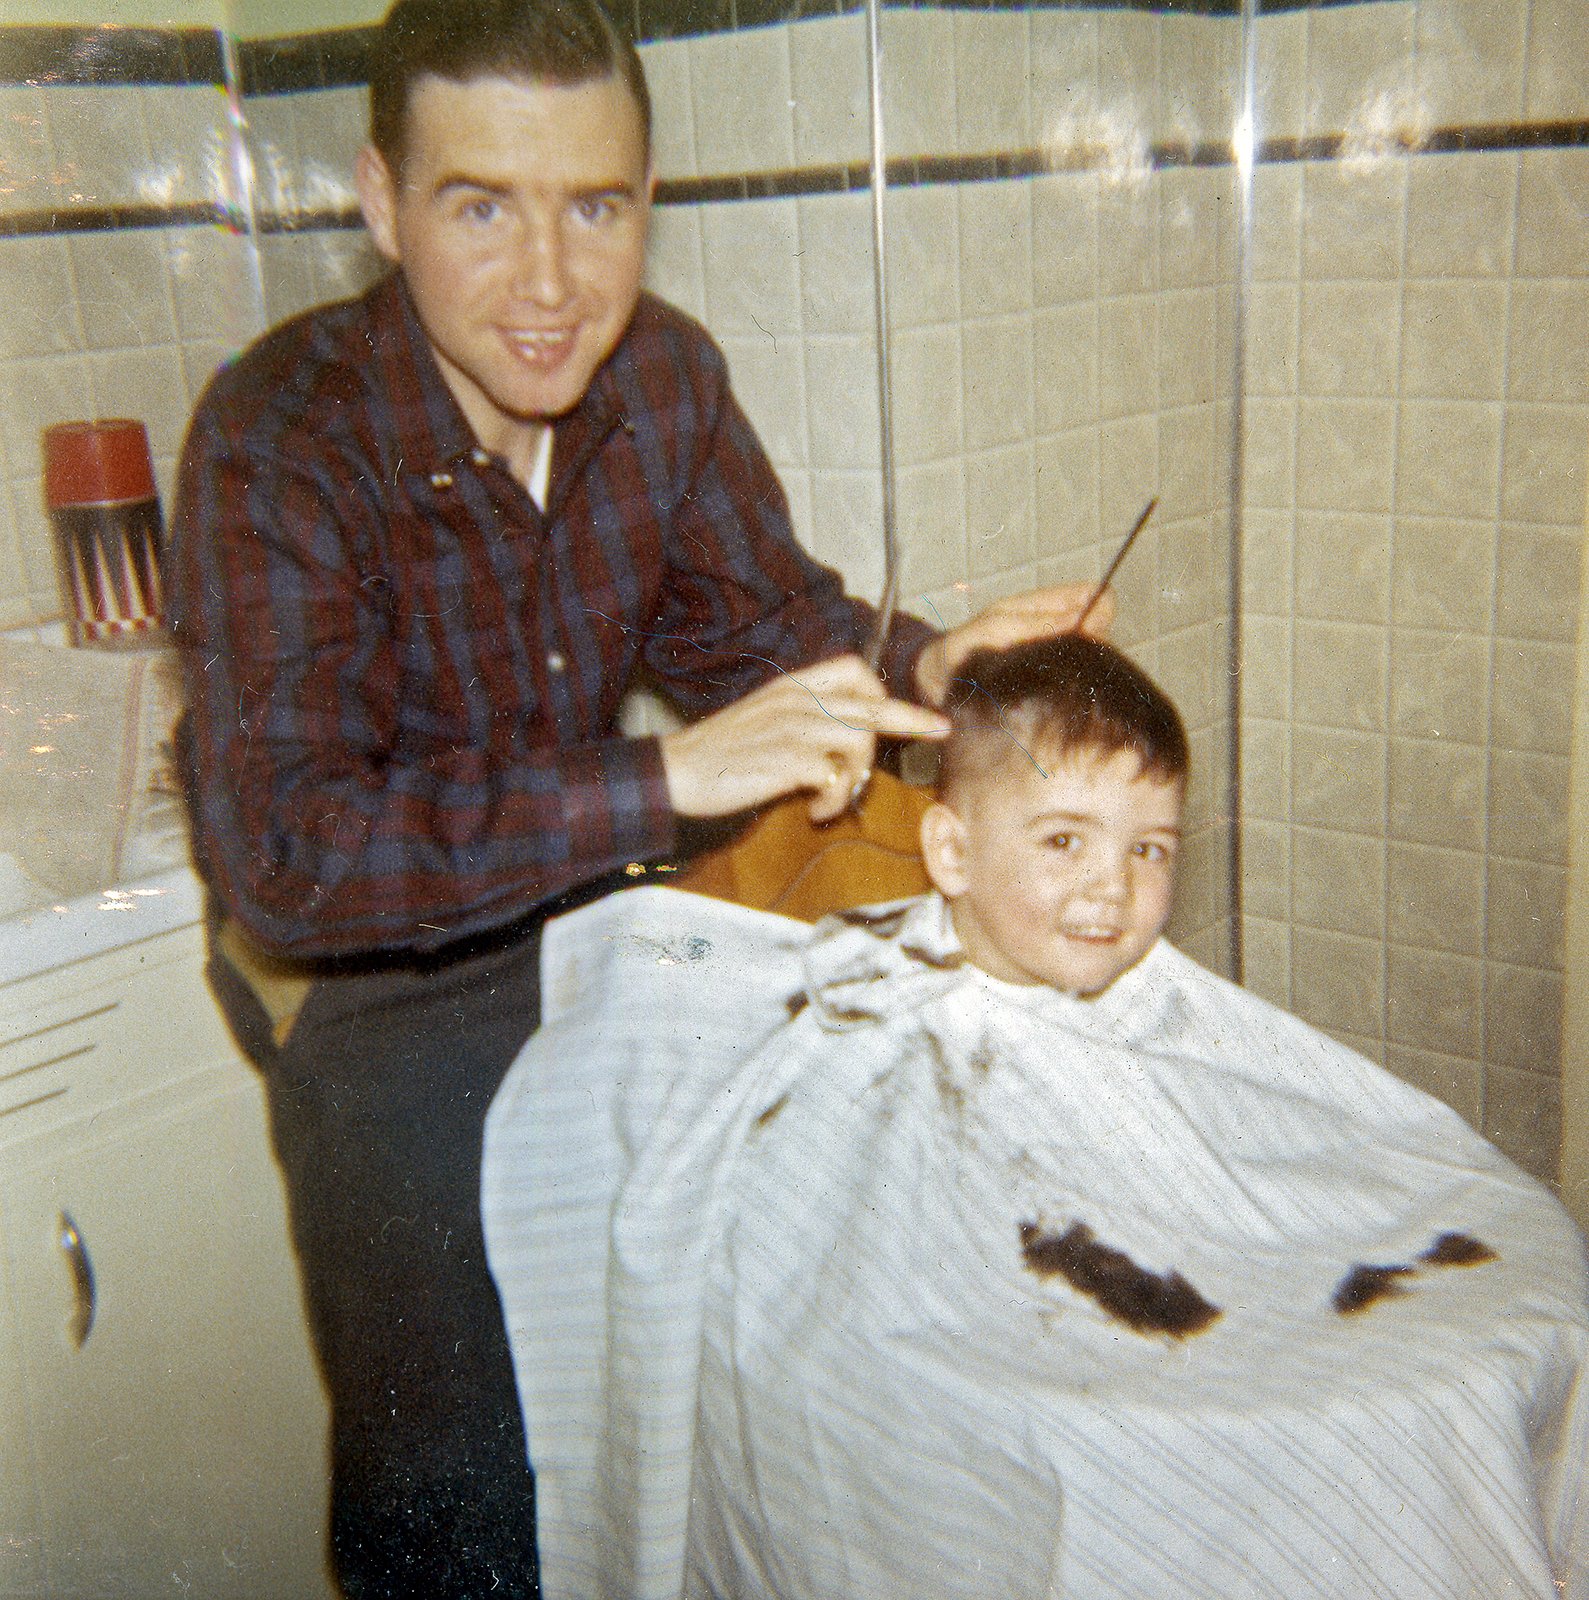 Seán Conlon getting a hair cut by Armagh native and family friend Frank Houlihan who worked as a professional barber in Philadelphia. Germantown, 1963.